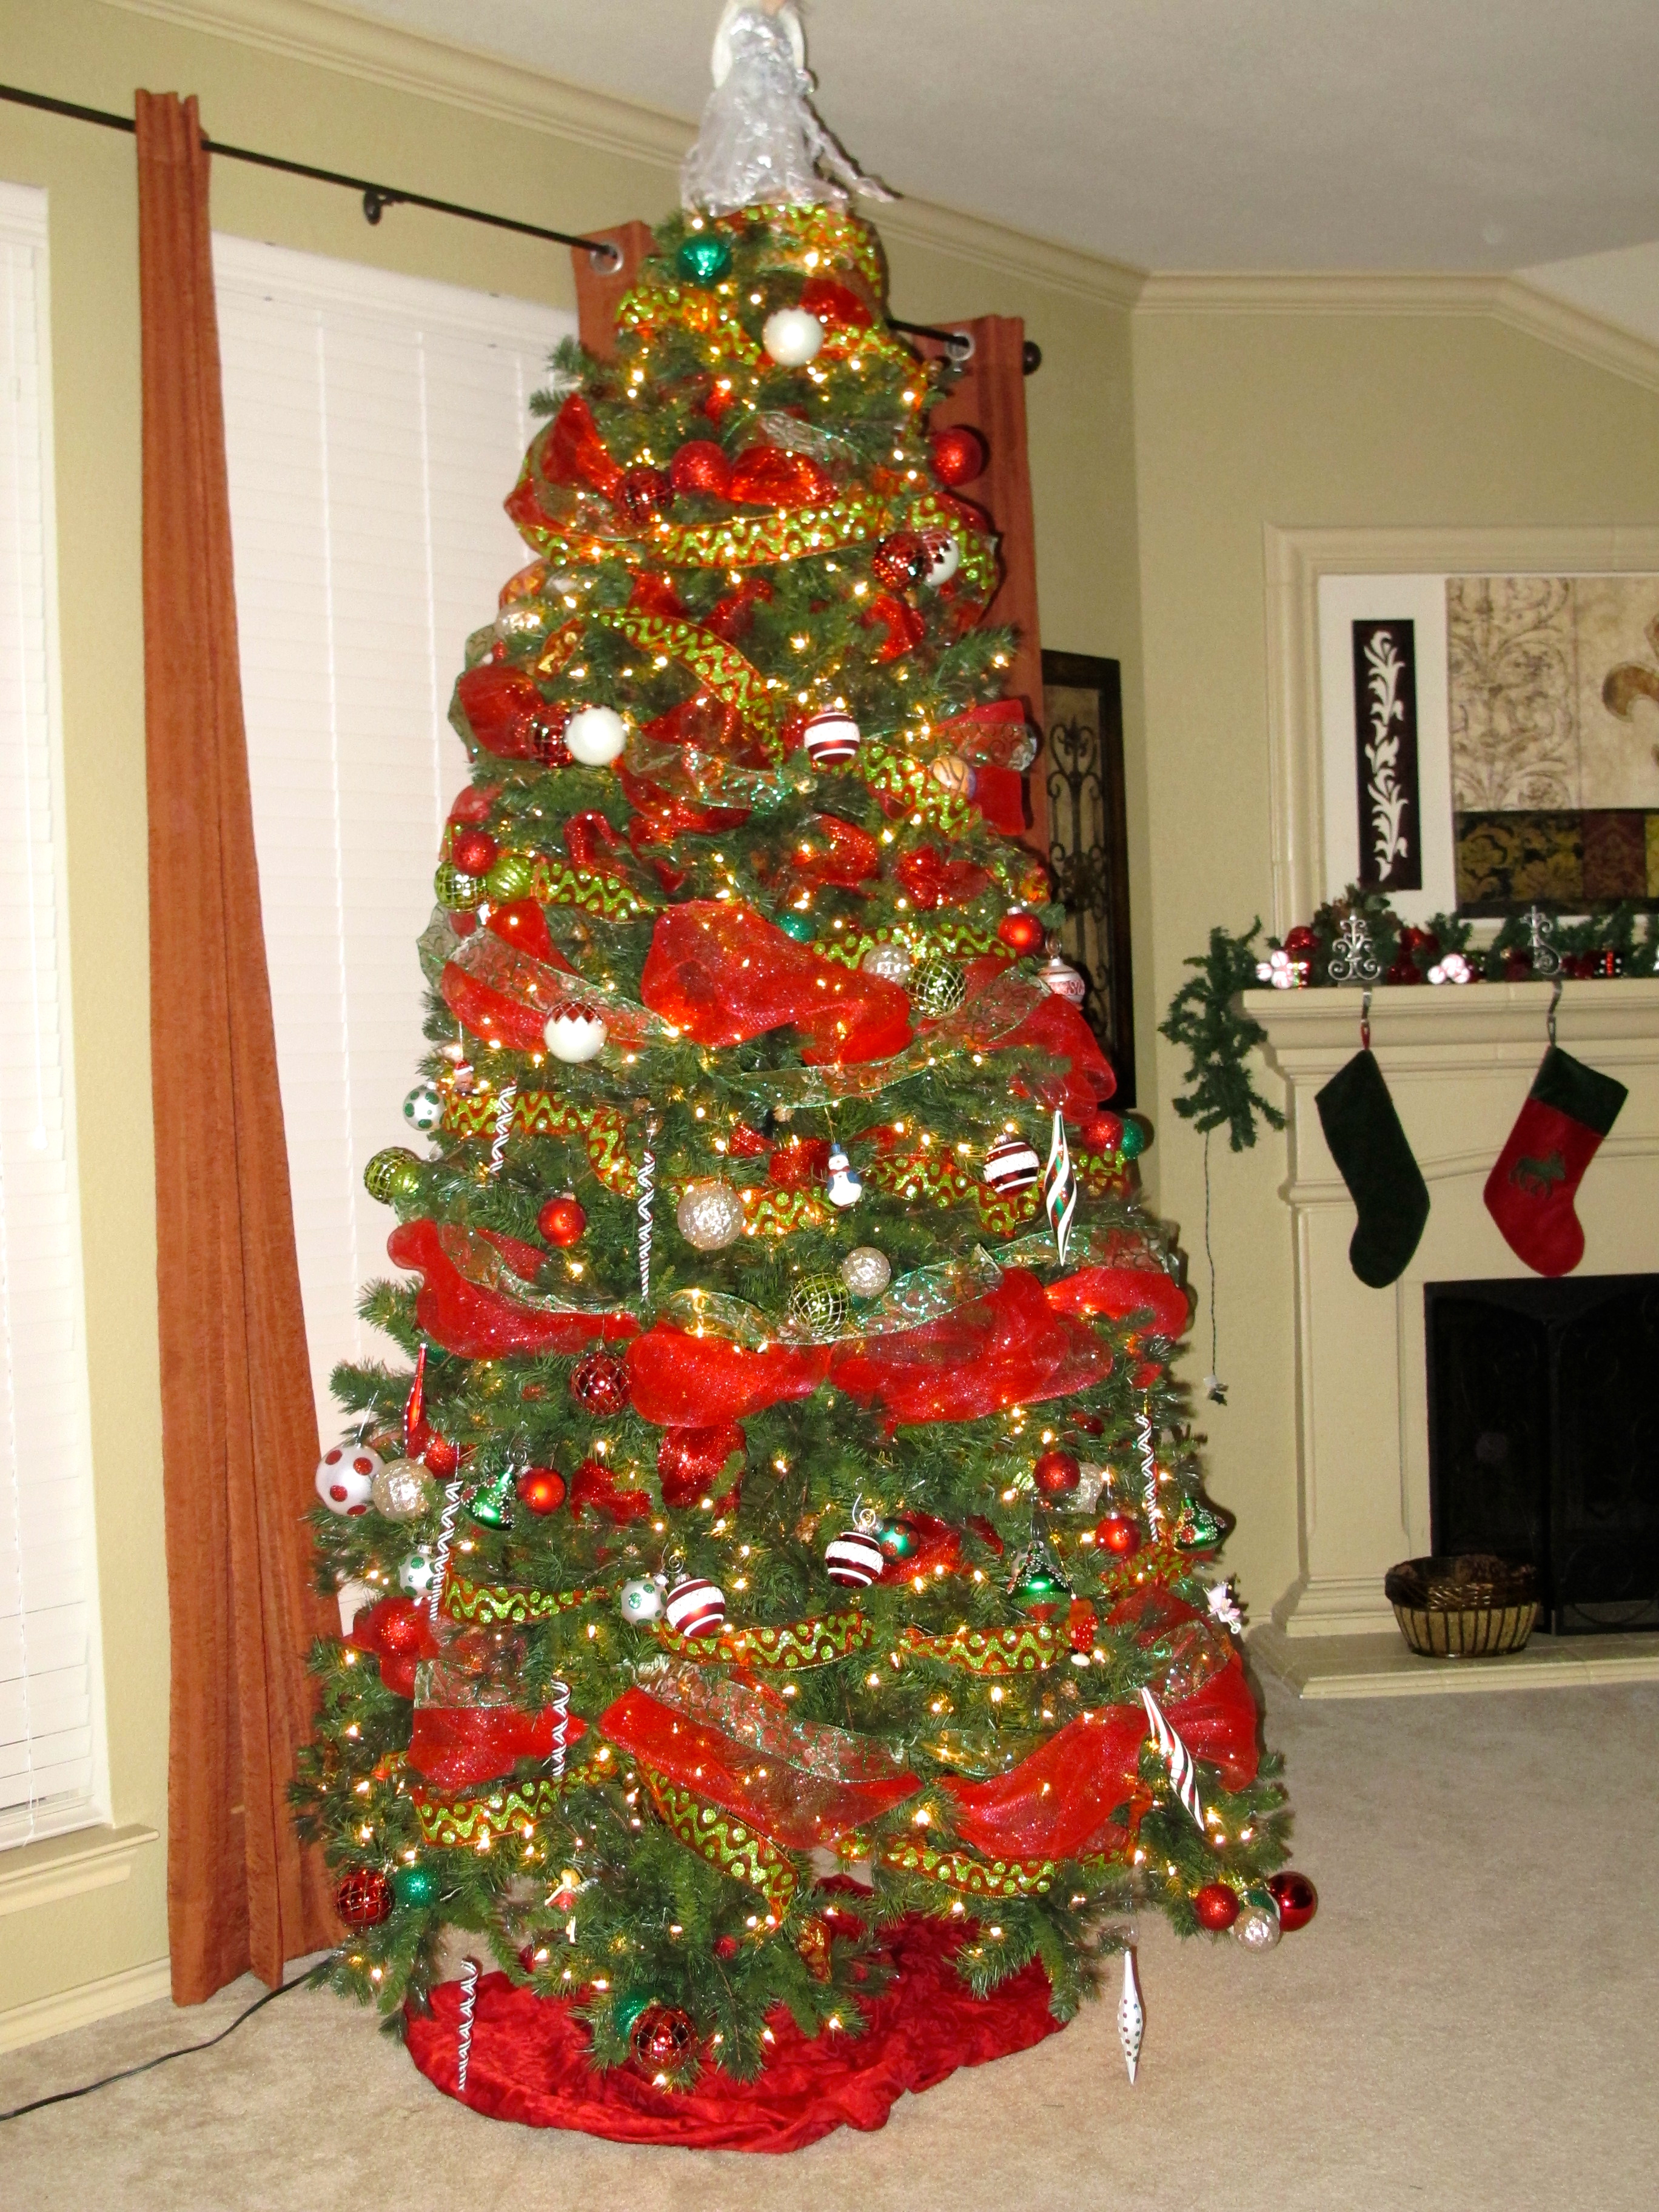 Pictures Of Christmas Trees Decorated With Mesh